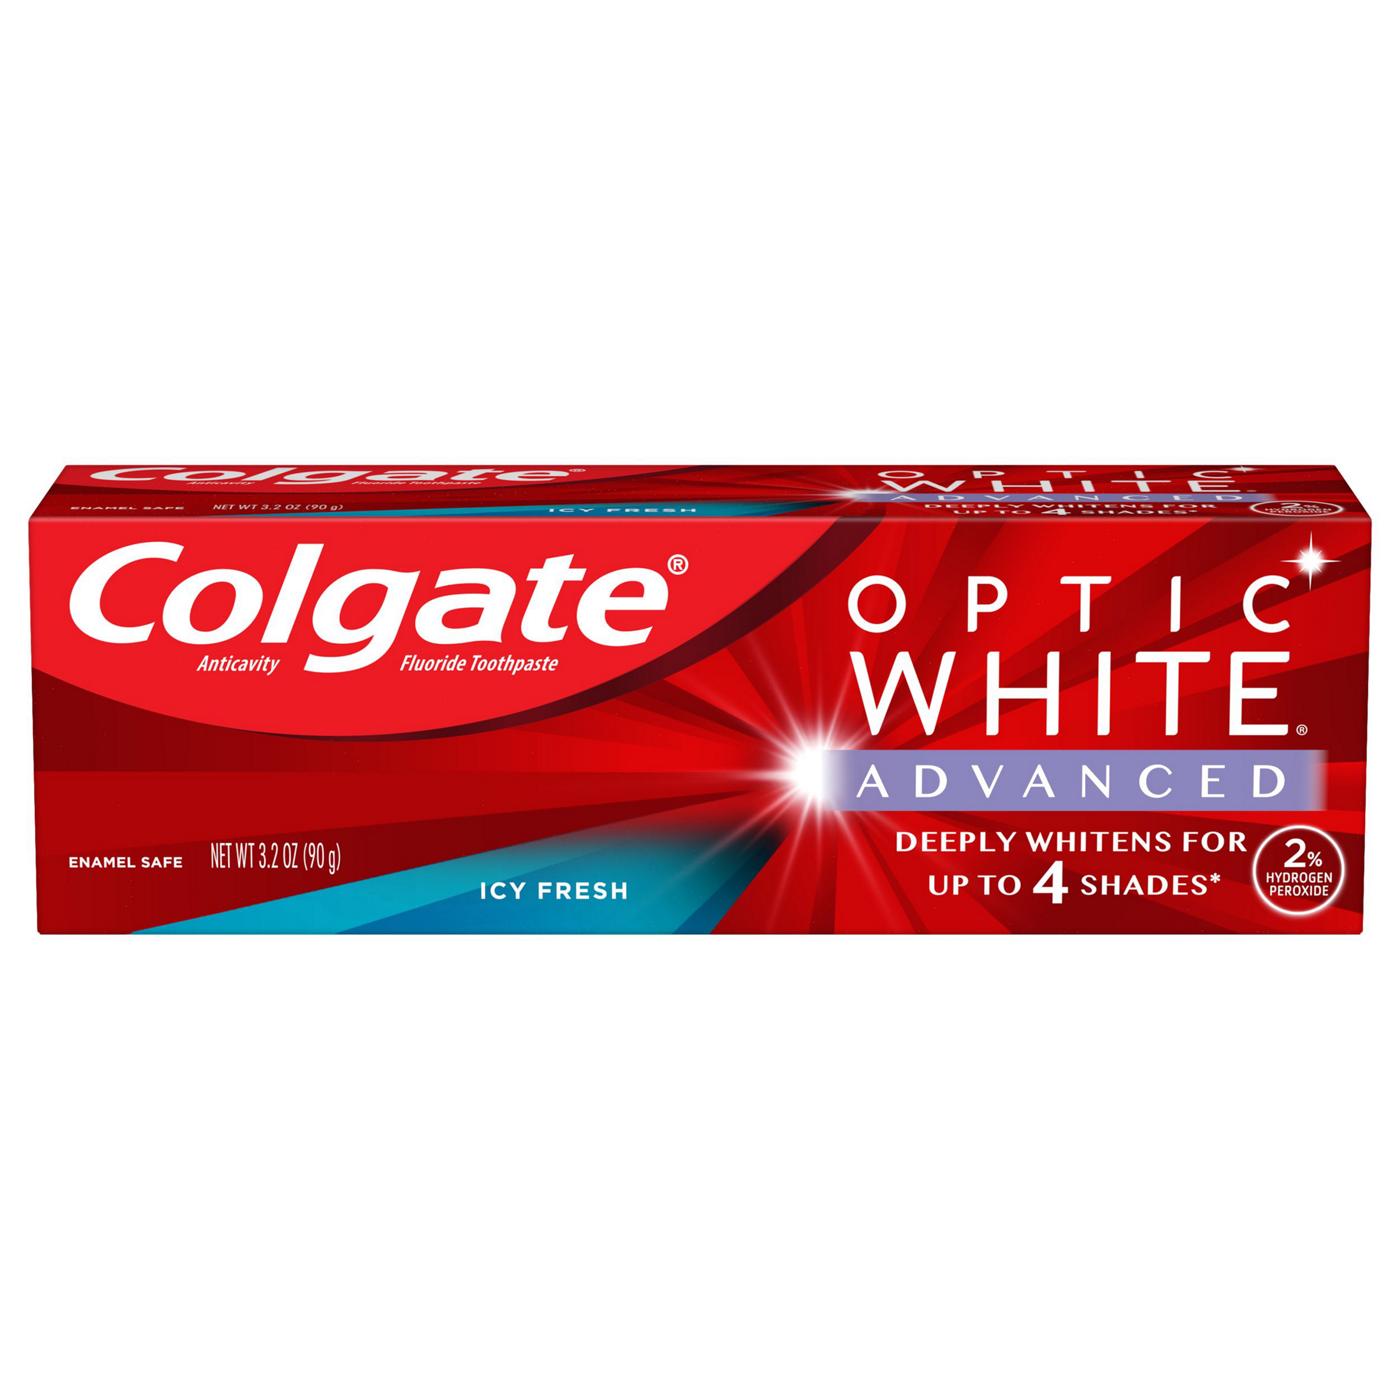 Colgate Optic White Advanced Anticavity Toothpaste - Icy Fresh; image 1 of 3